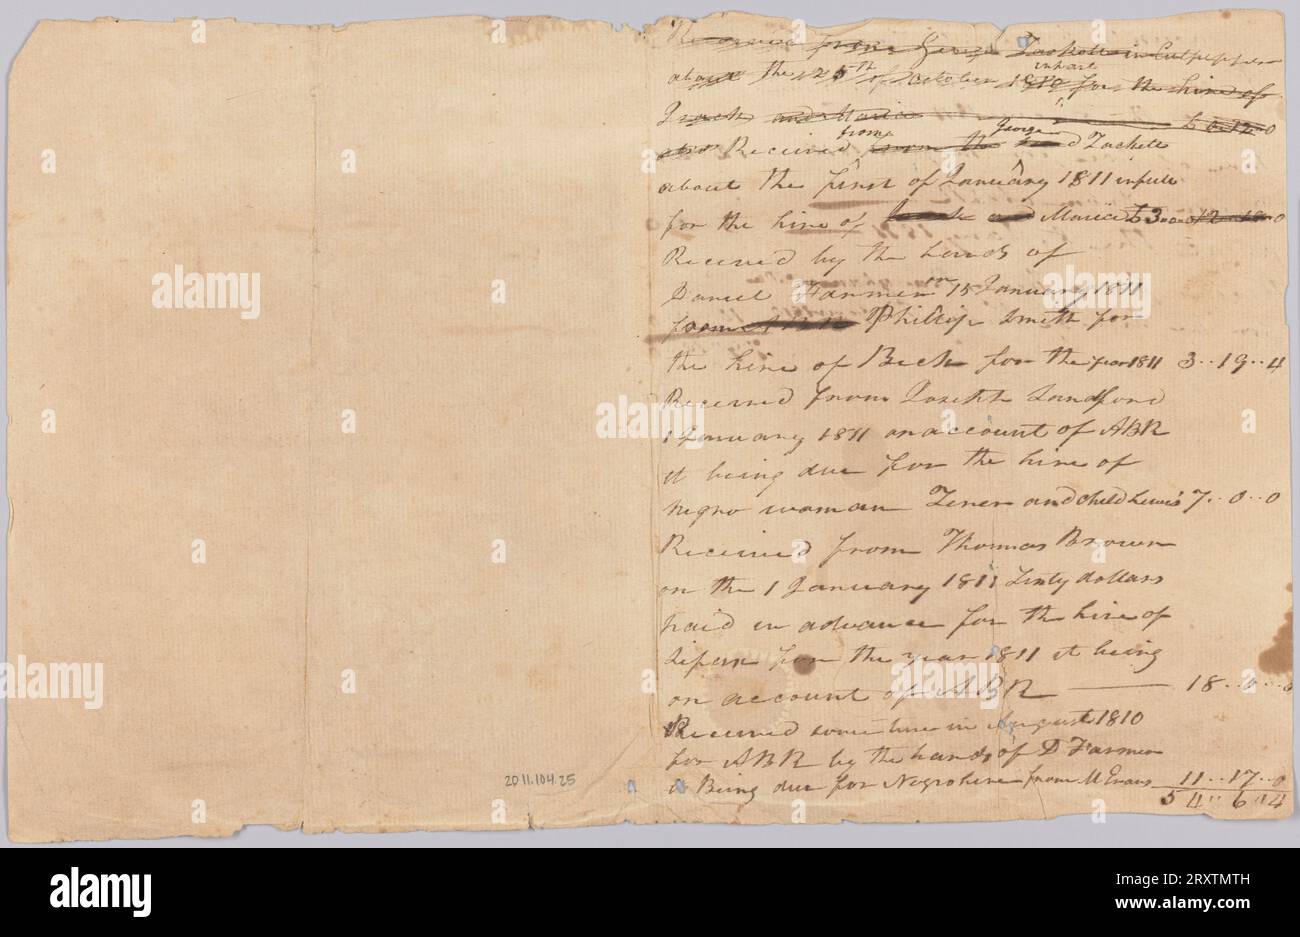 Accounting record for the Rouzee family with notes on hires of enslaved persons 1810-1811 Stock Photo